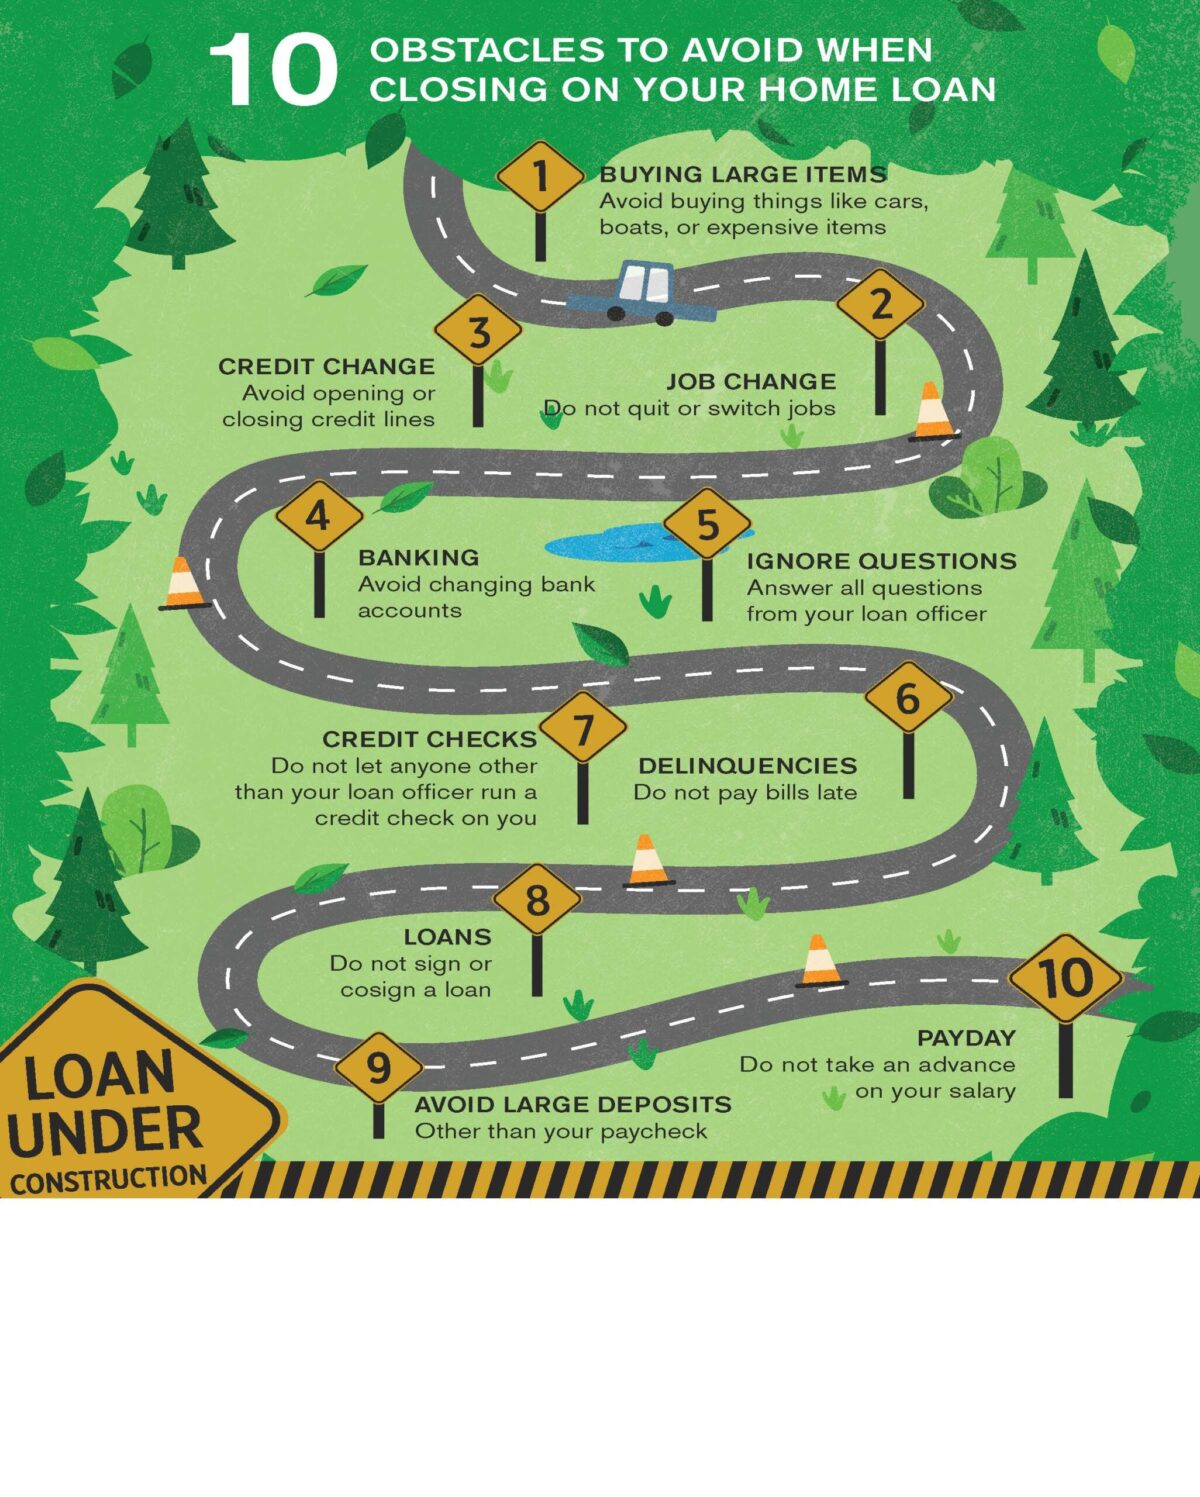 10 Obstacles to Avoid when Closing on Your Home Loan